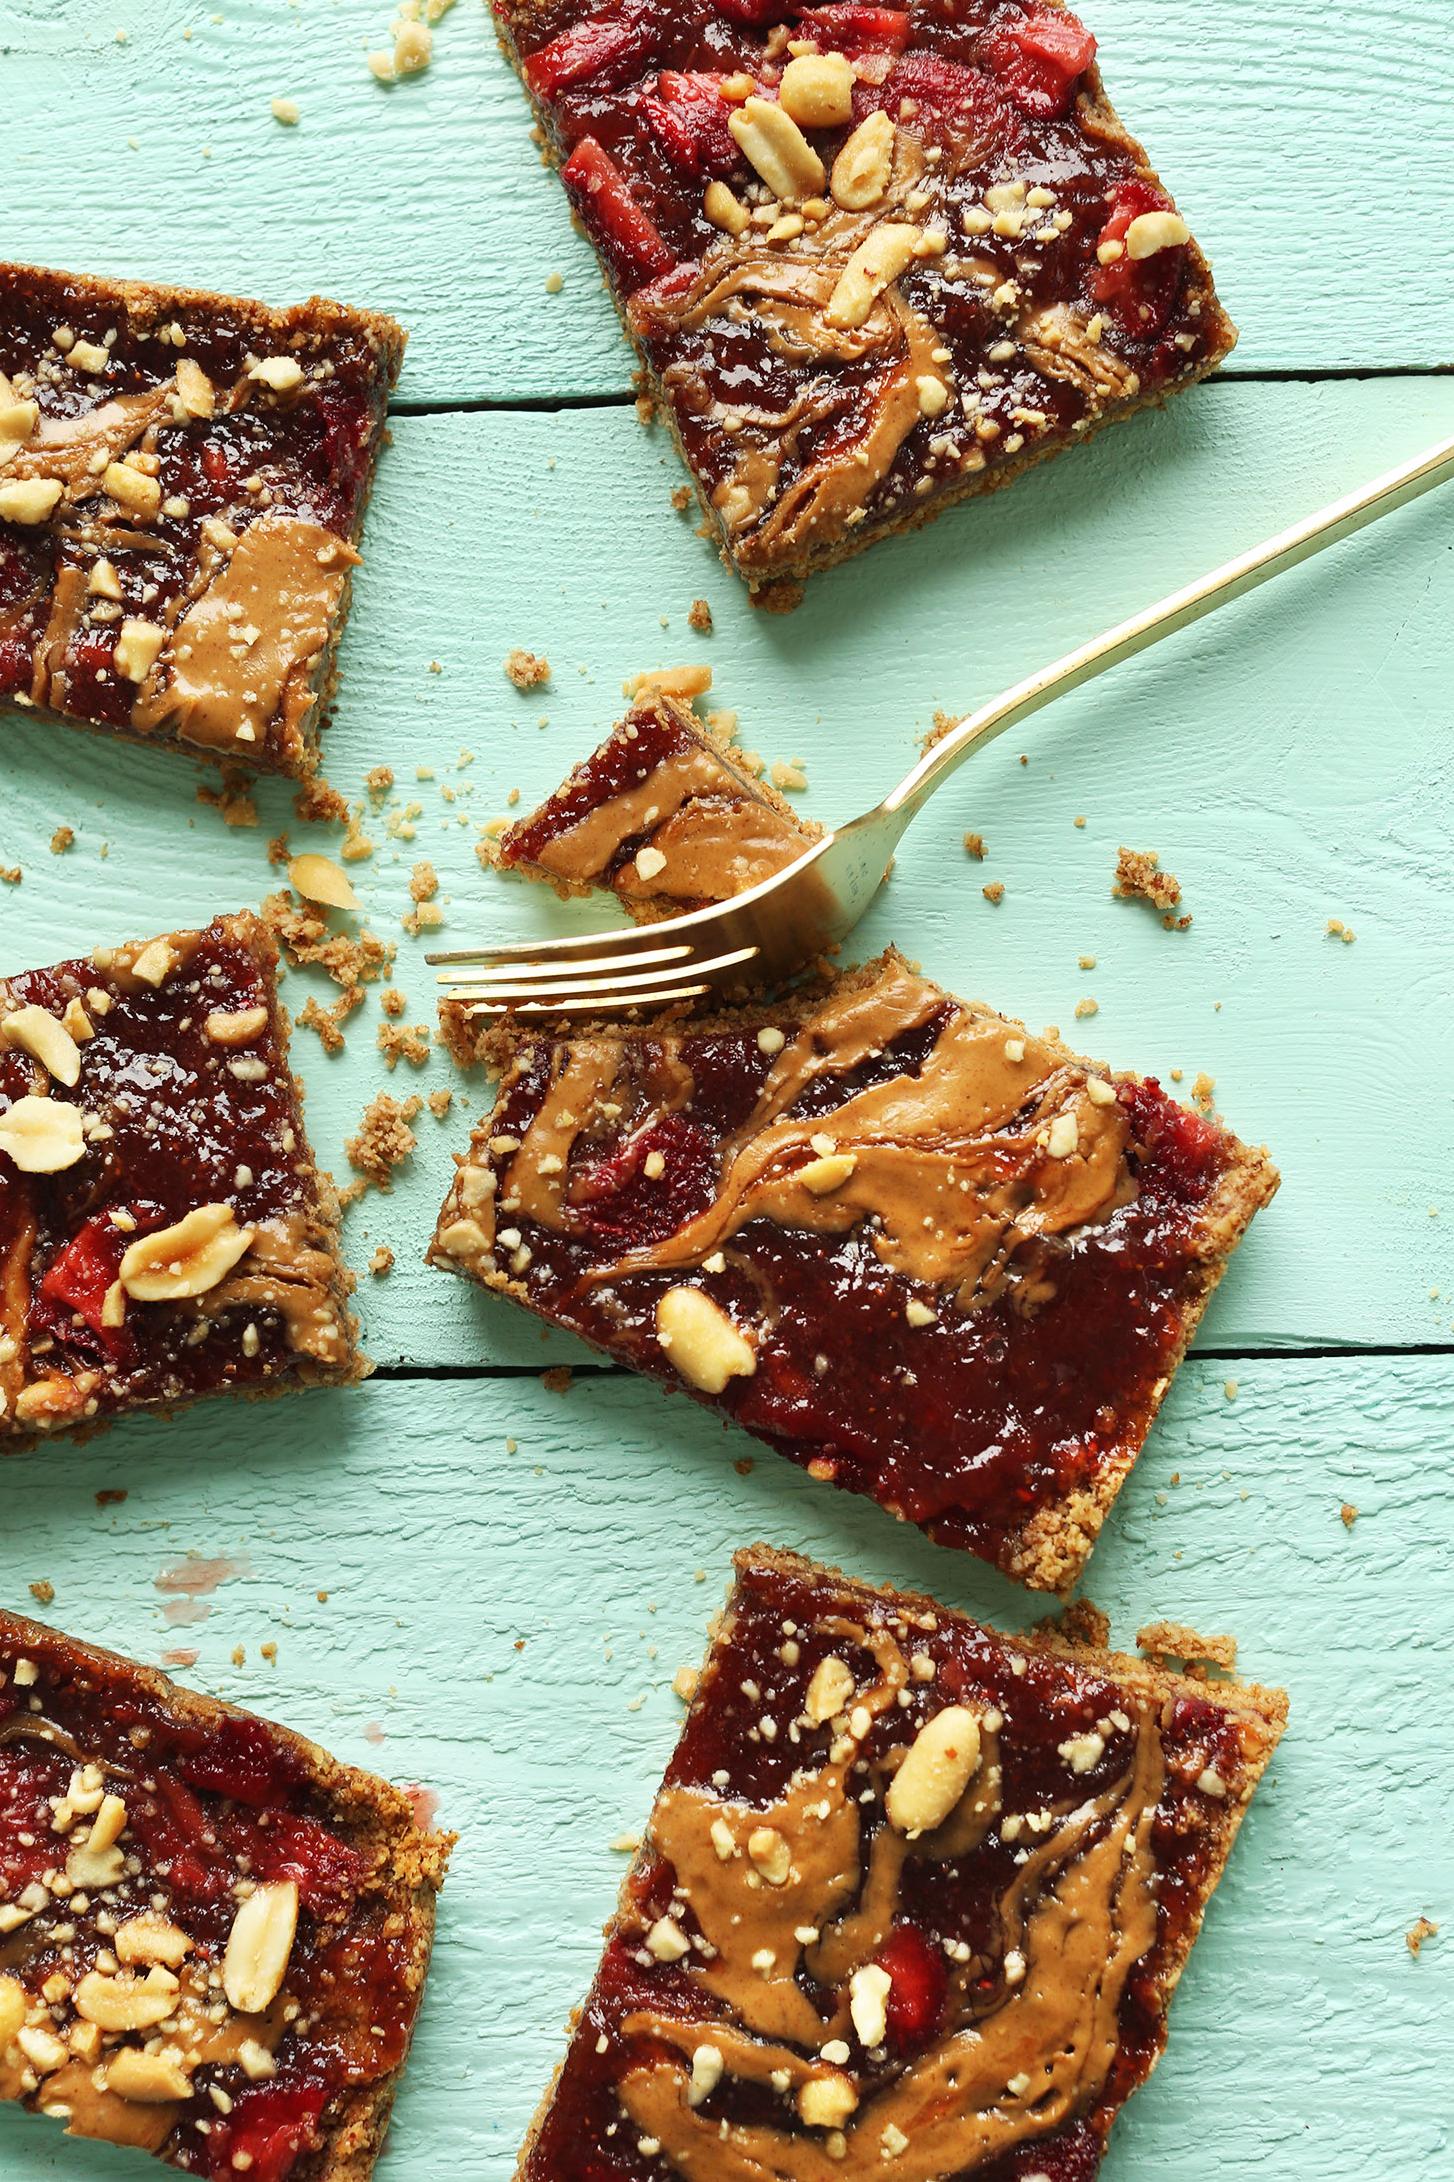  A childhood classic turned into a healthier alternative, these bars are the real MVPs.